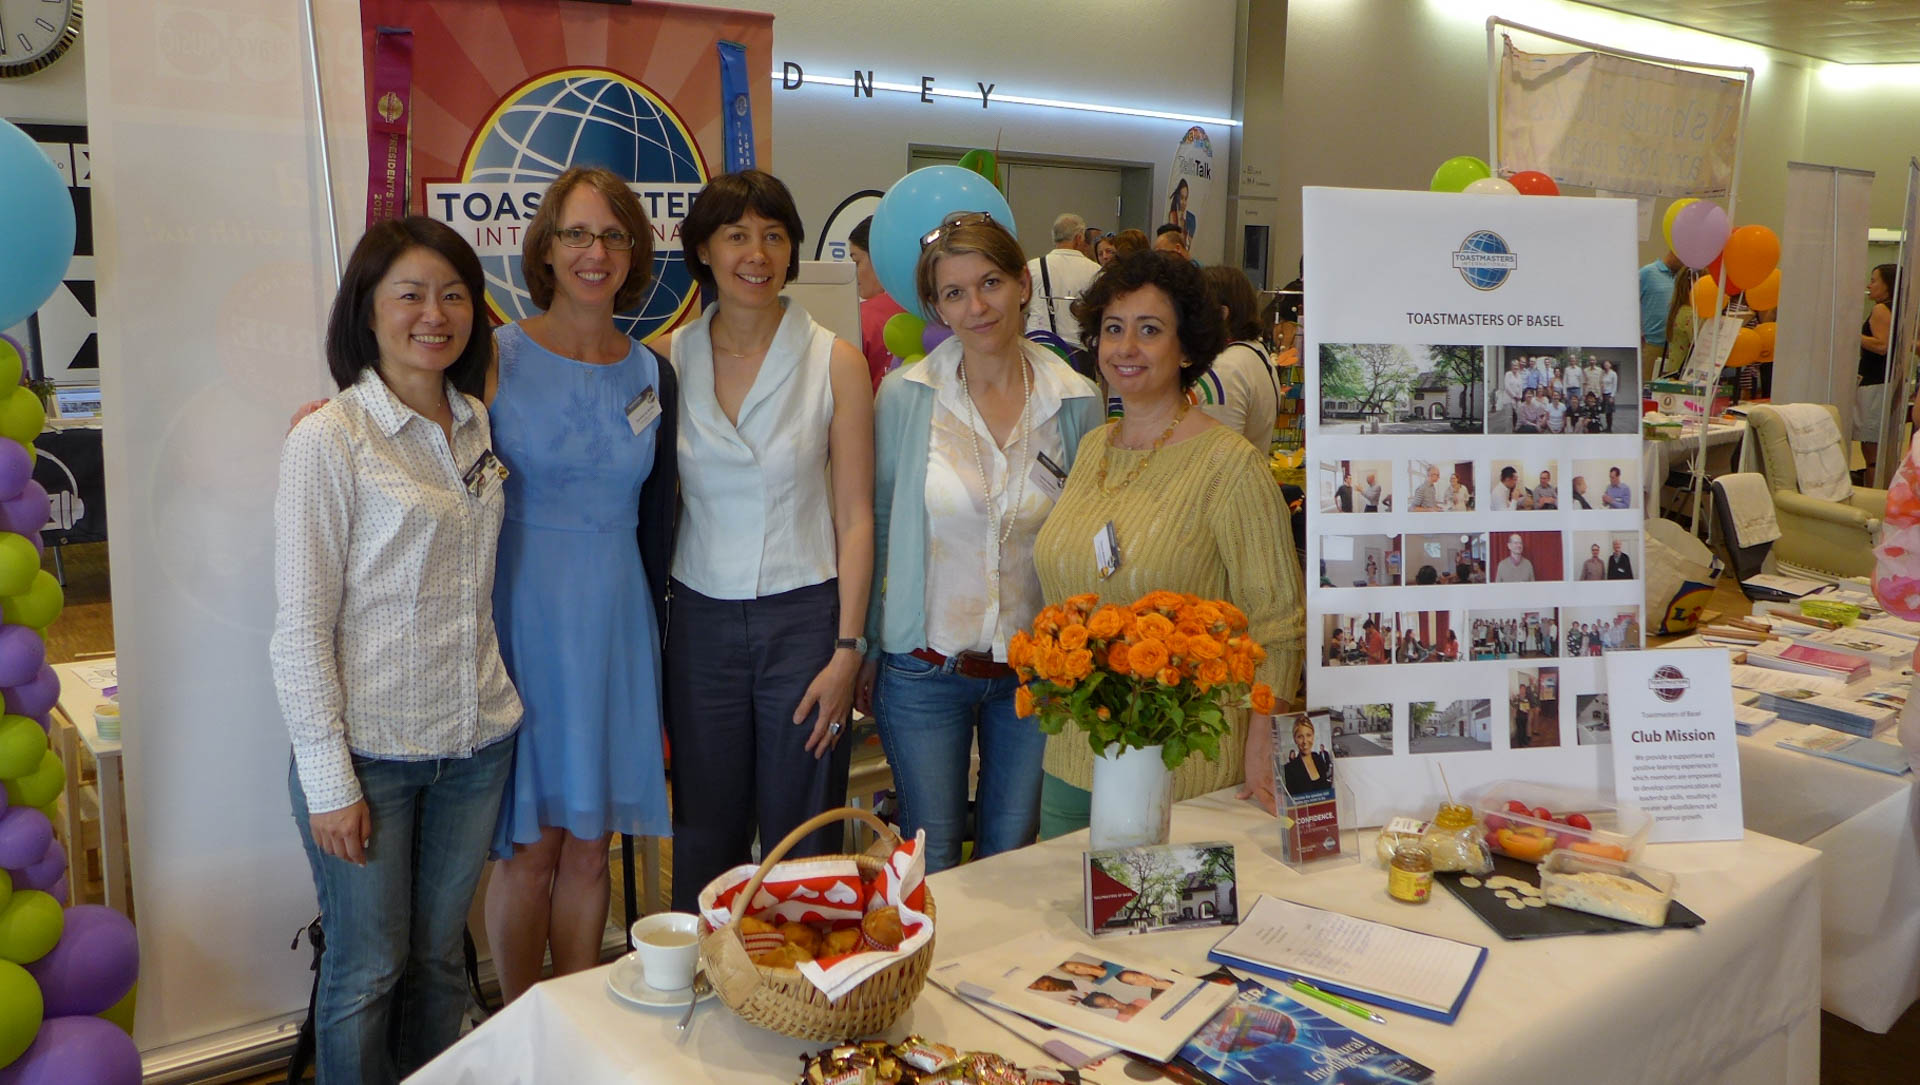 Toastmasters of Basel at the Expat Expo 2015